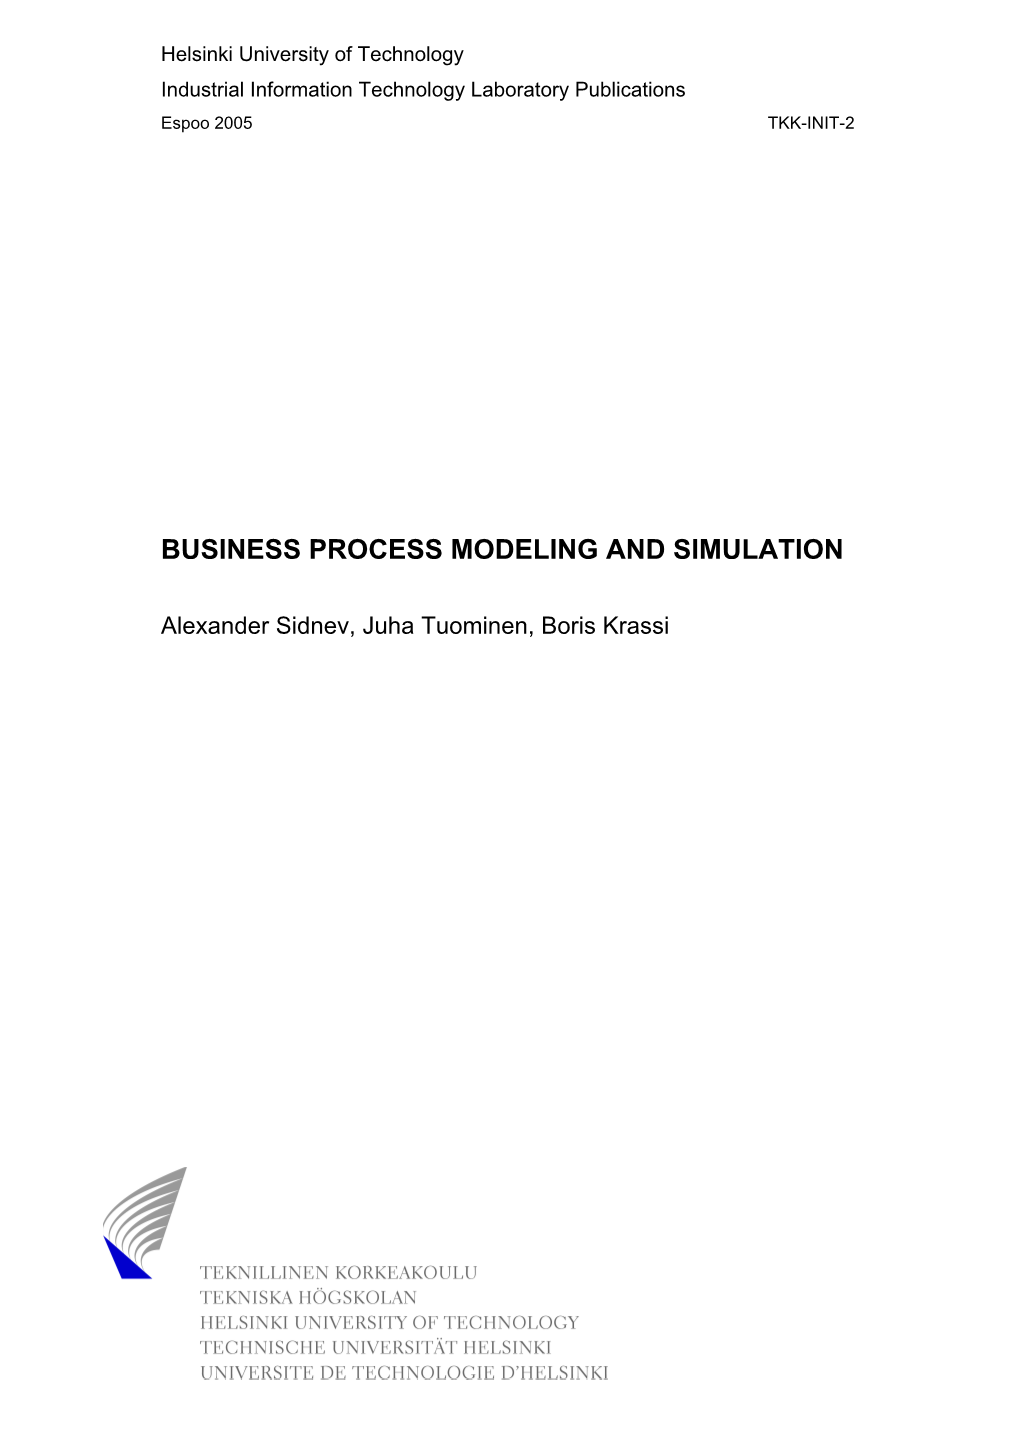 Business Process Modeling and Simulation